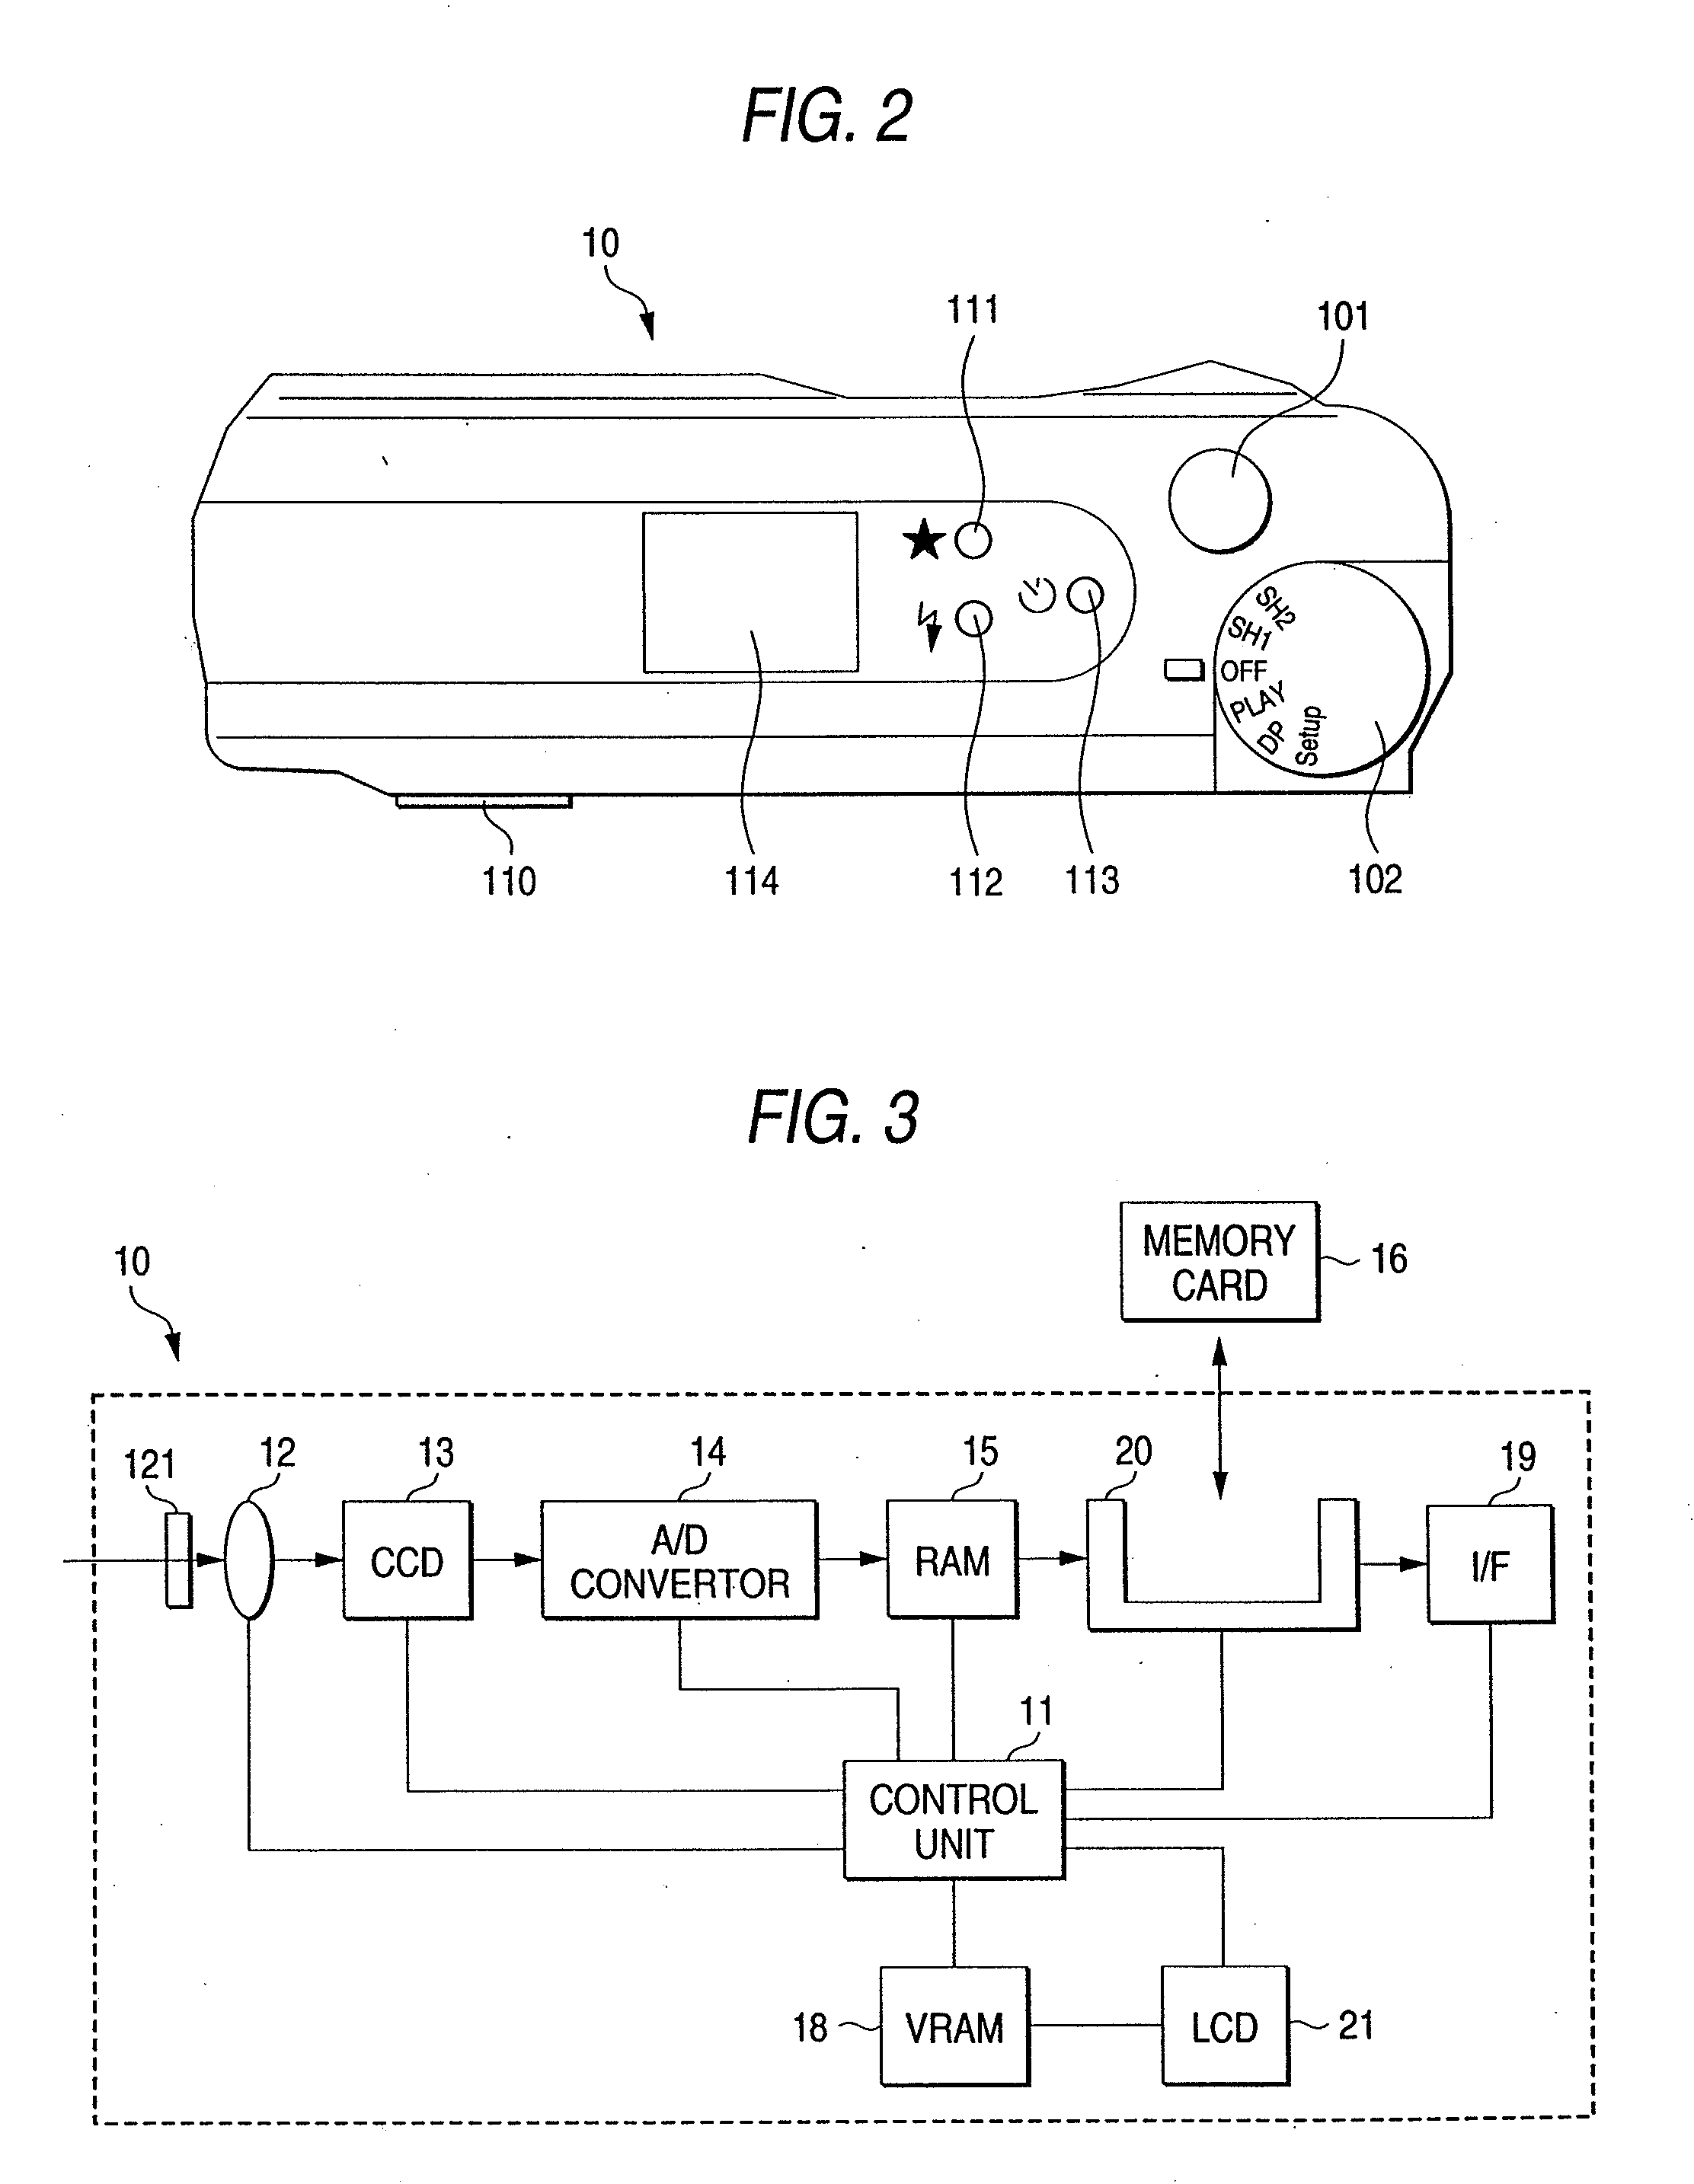 Digital Camera Having Input Devices and a Display Capable of Displaying a Plurality of Set Information Items